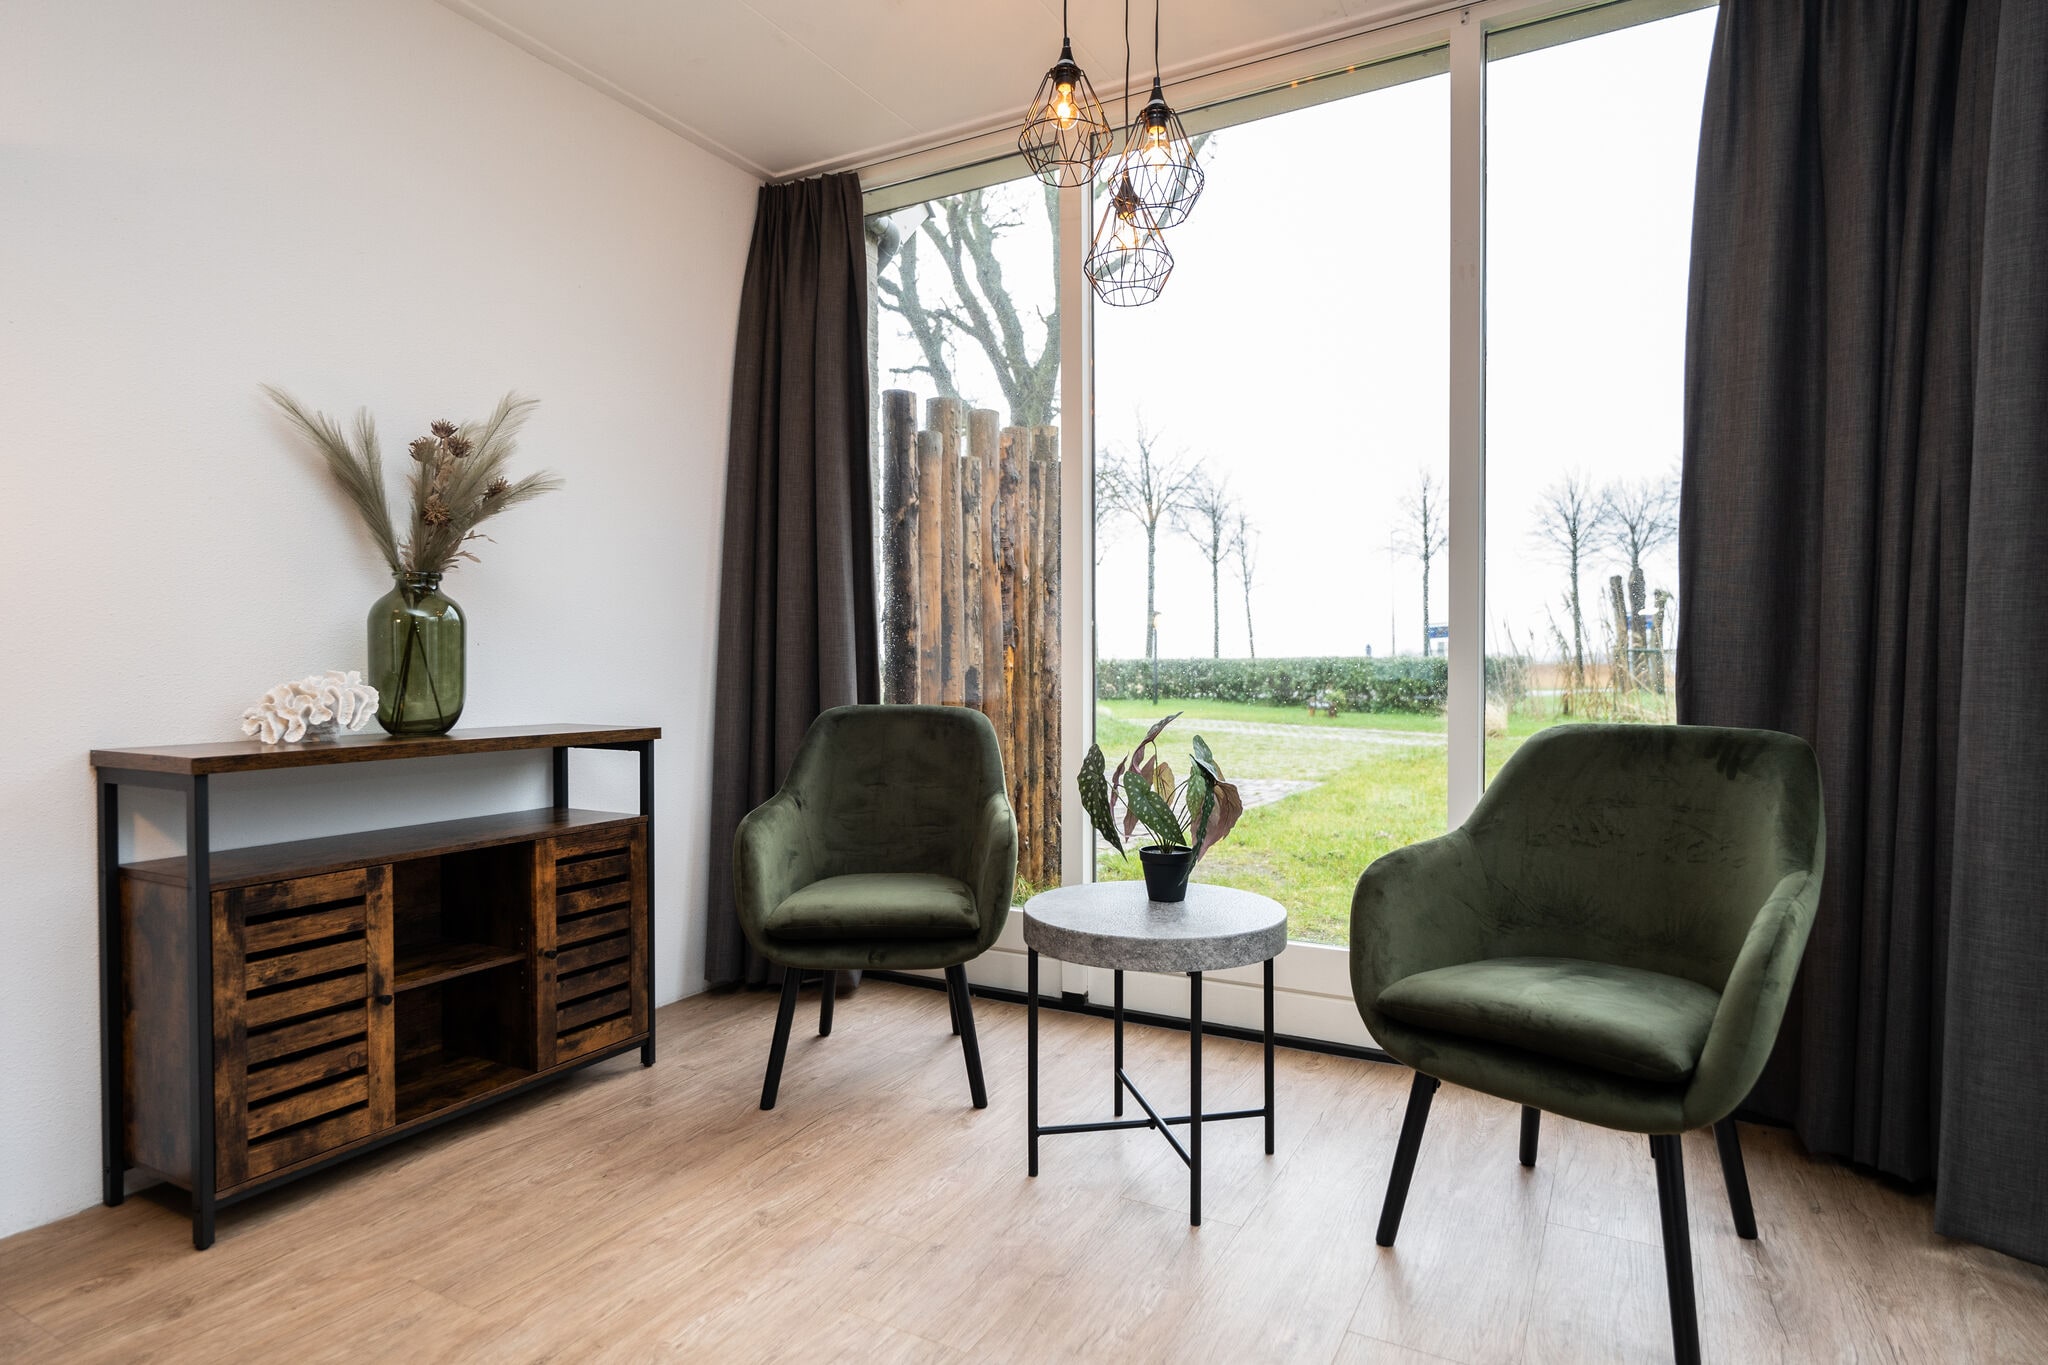 Atmospheric holiday home with WiFi in a holiday park located on Texel